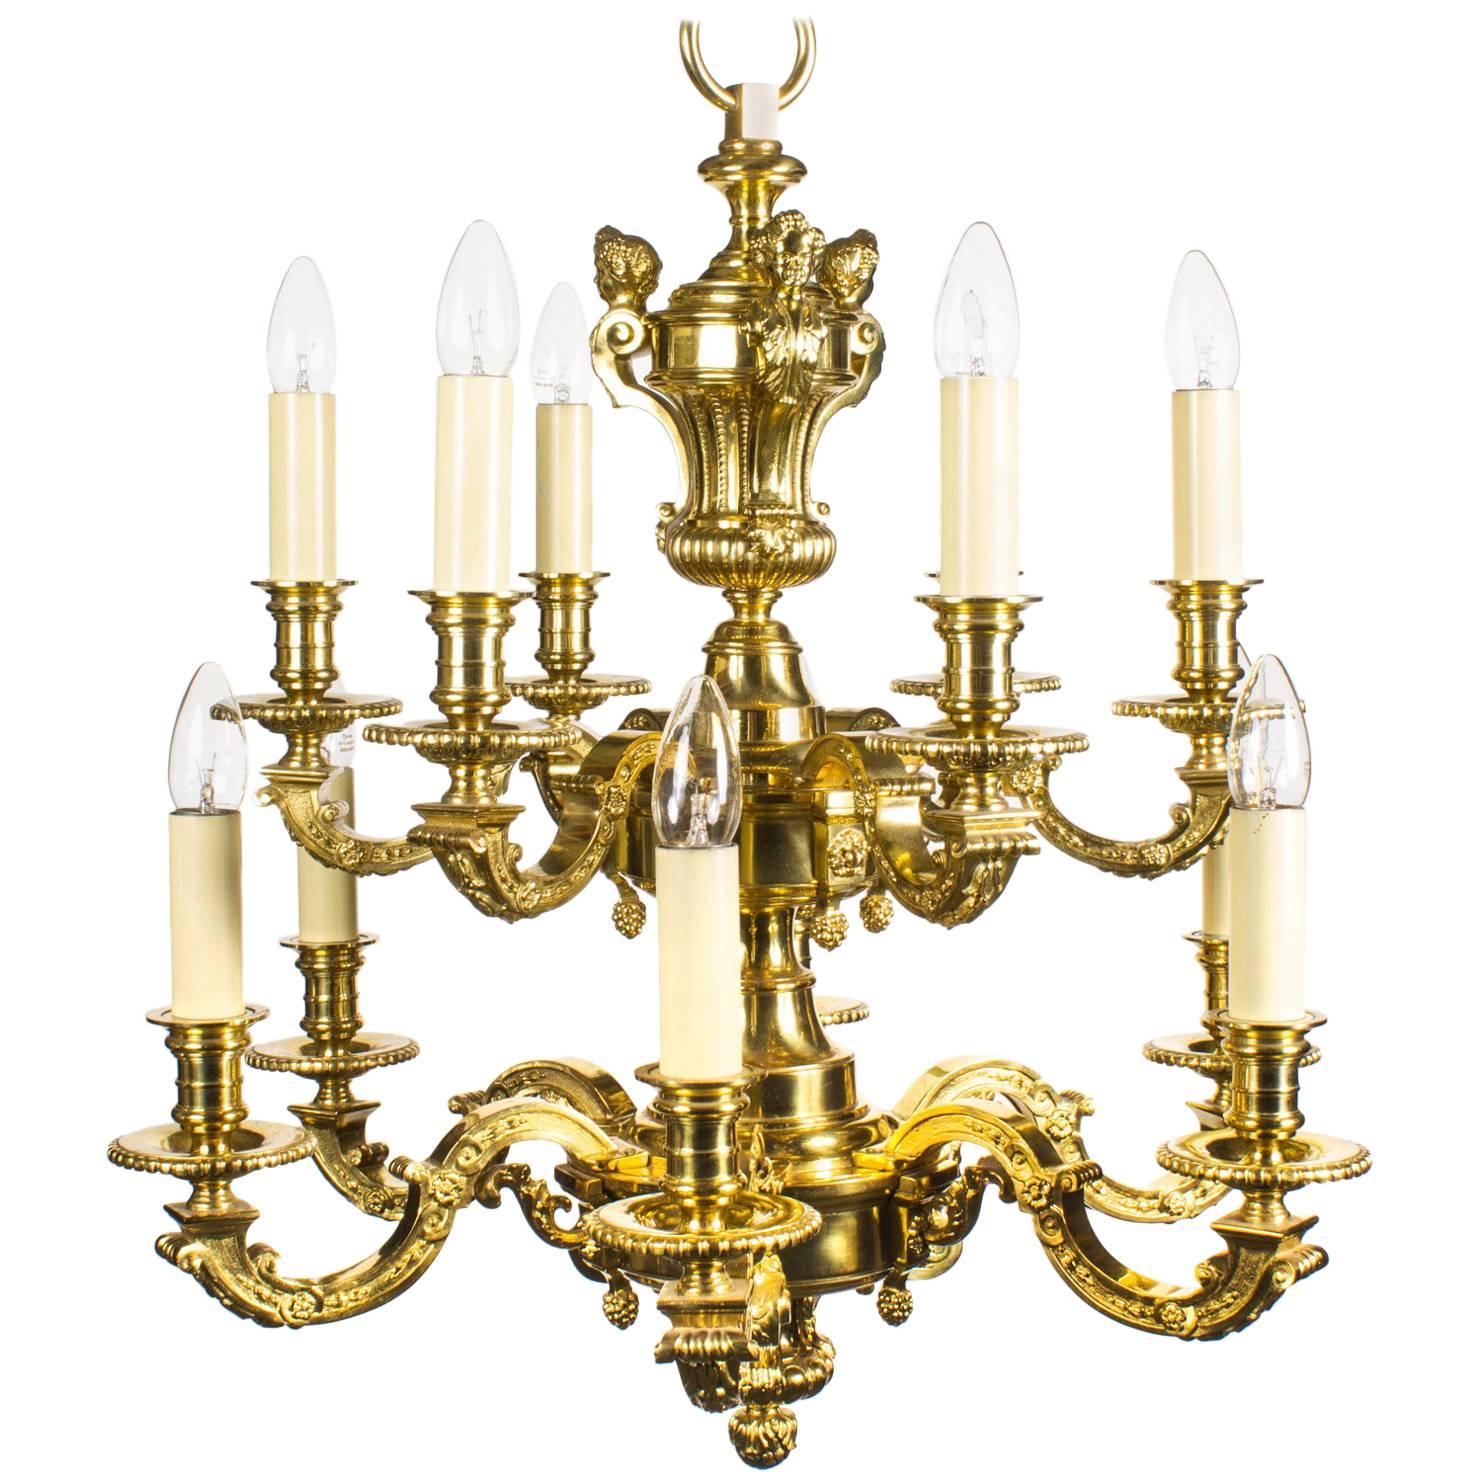 Early 20th Century French Louis XIV Style Twelve Branch Ormolu Chandelier For Sale